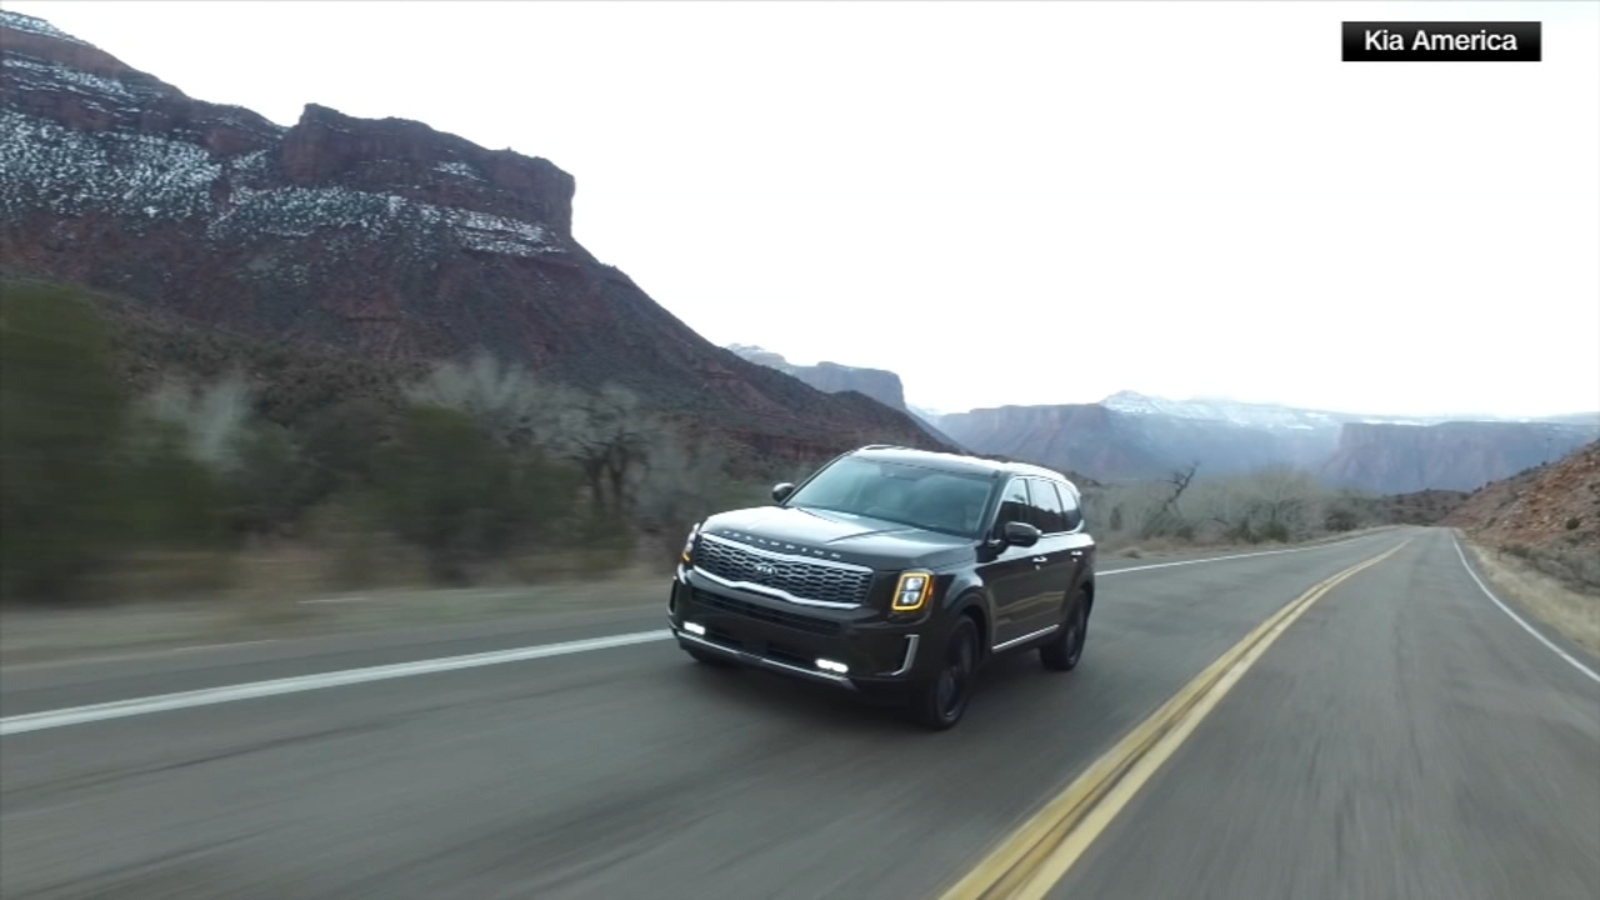 Kia Telluride recall warns of potential for front seats to catch fire, affecting almost 463,000 SUVs [Video]